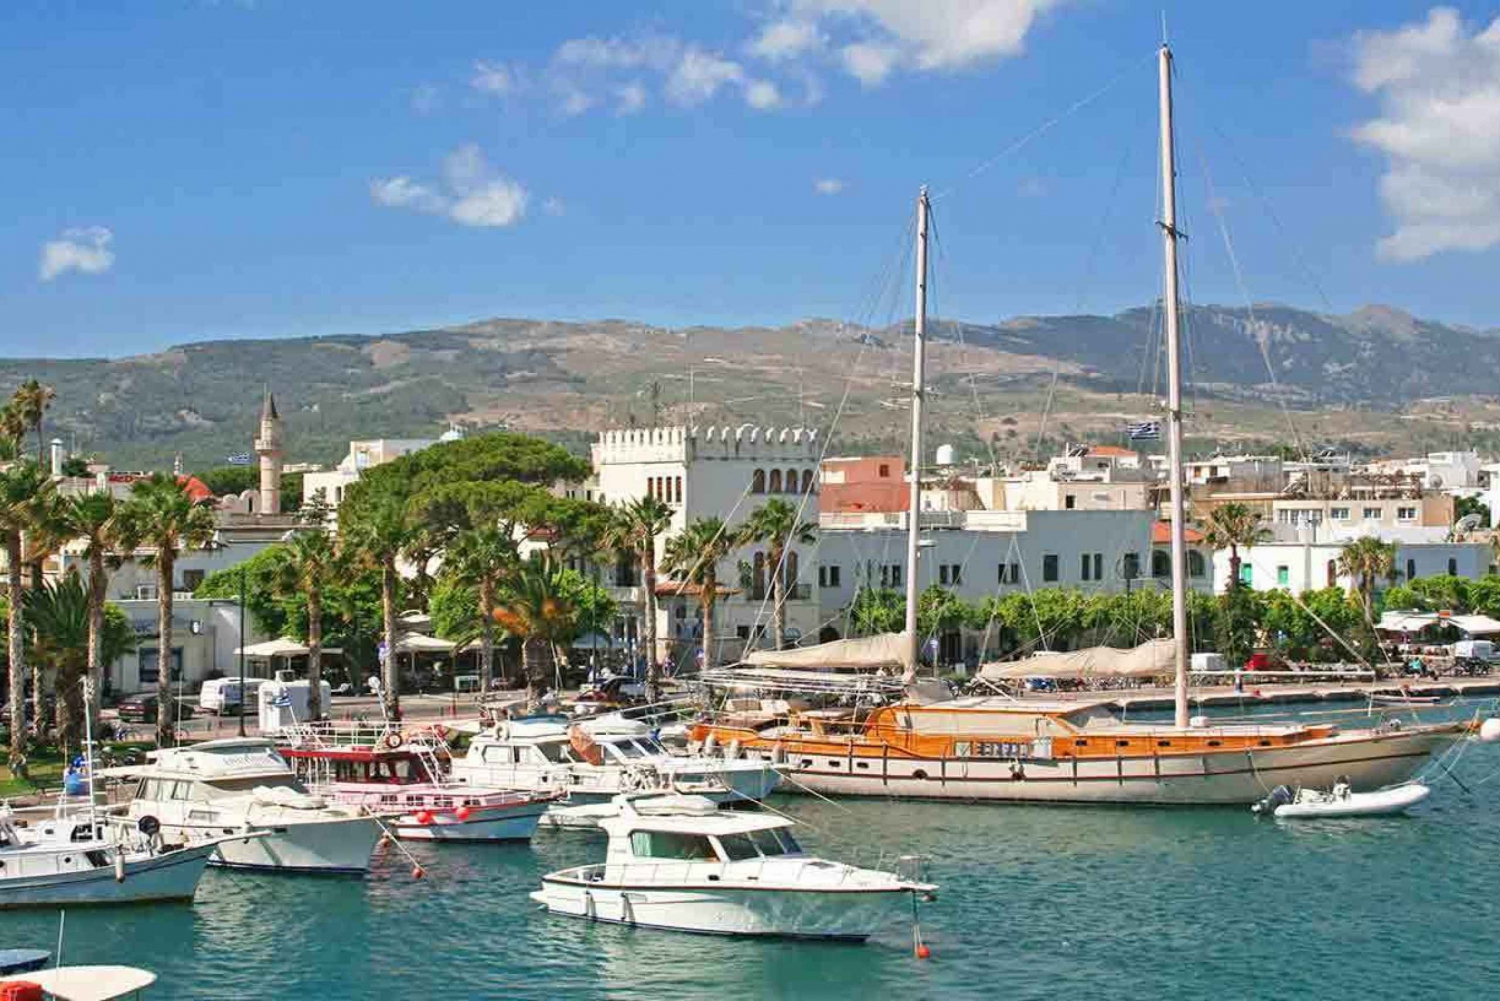 Kos Island Independent Day Trip by Boat from Bodrum